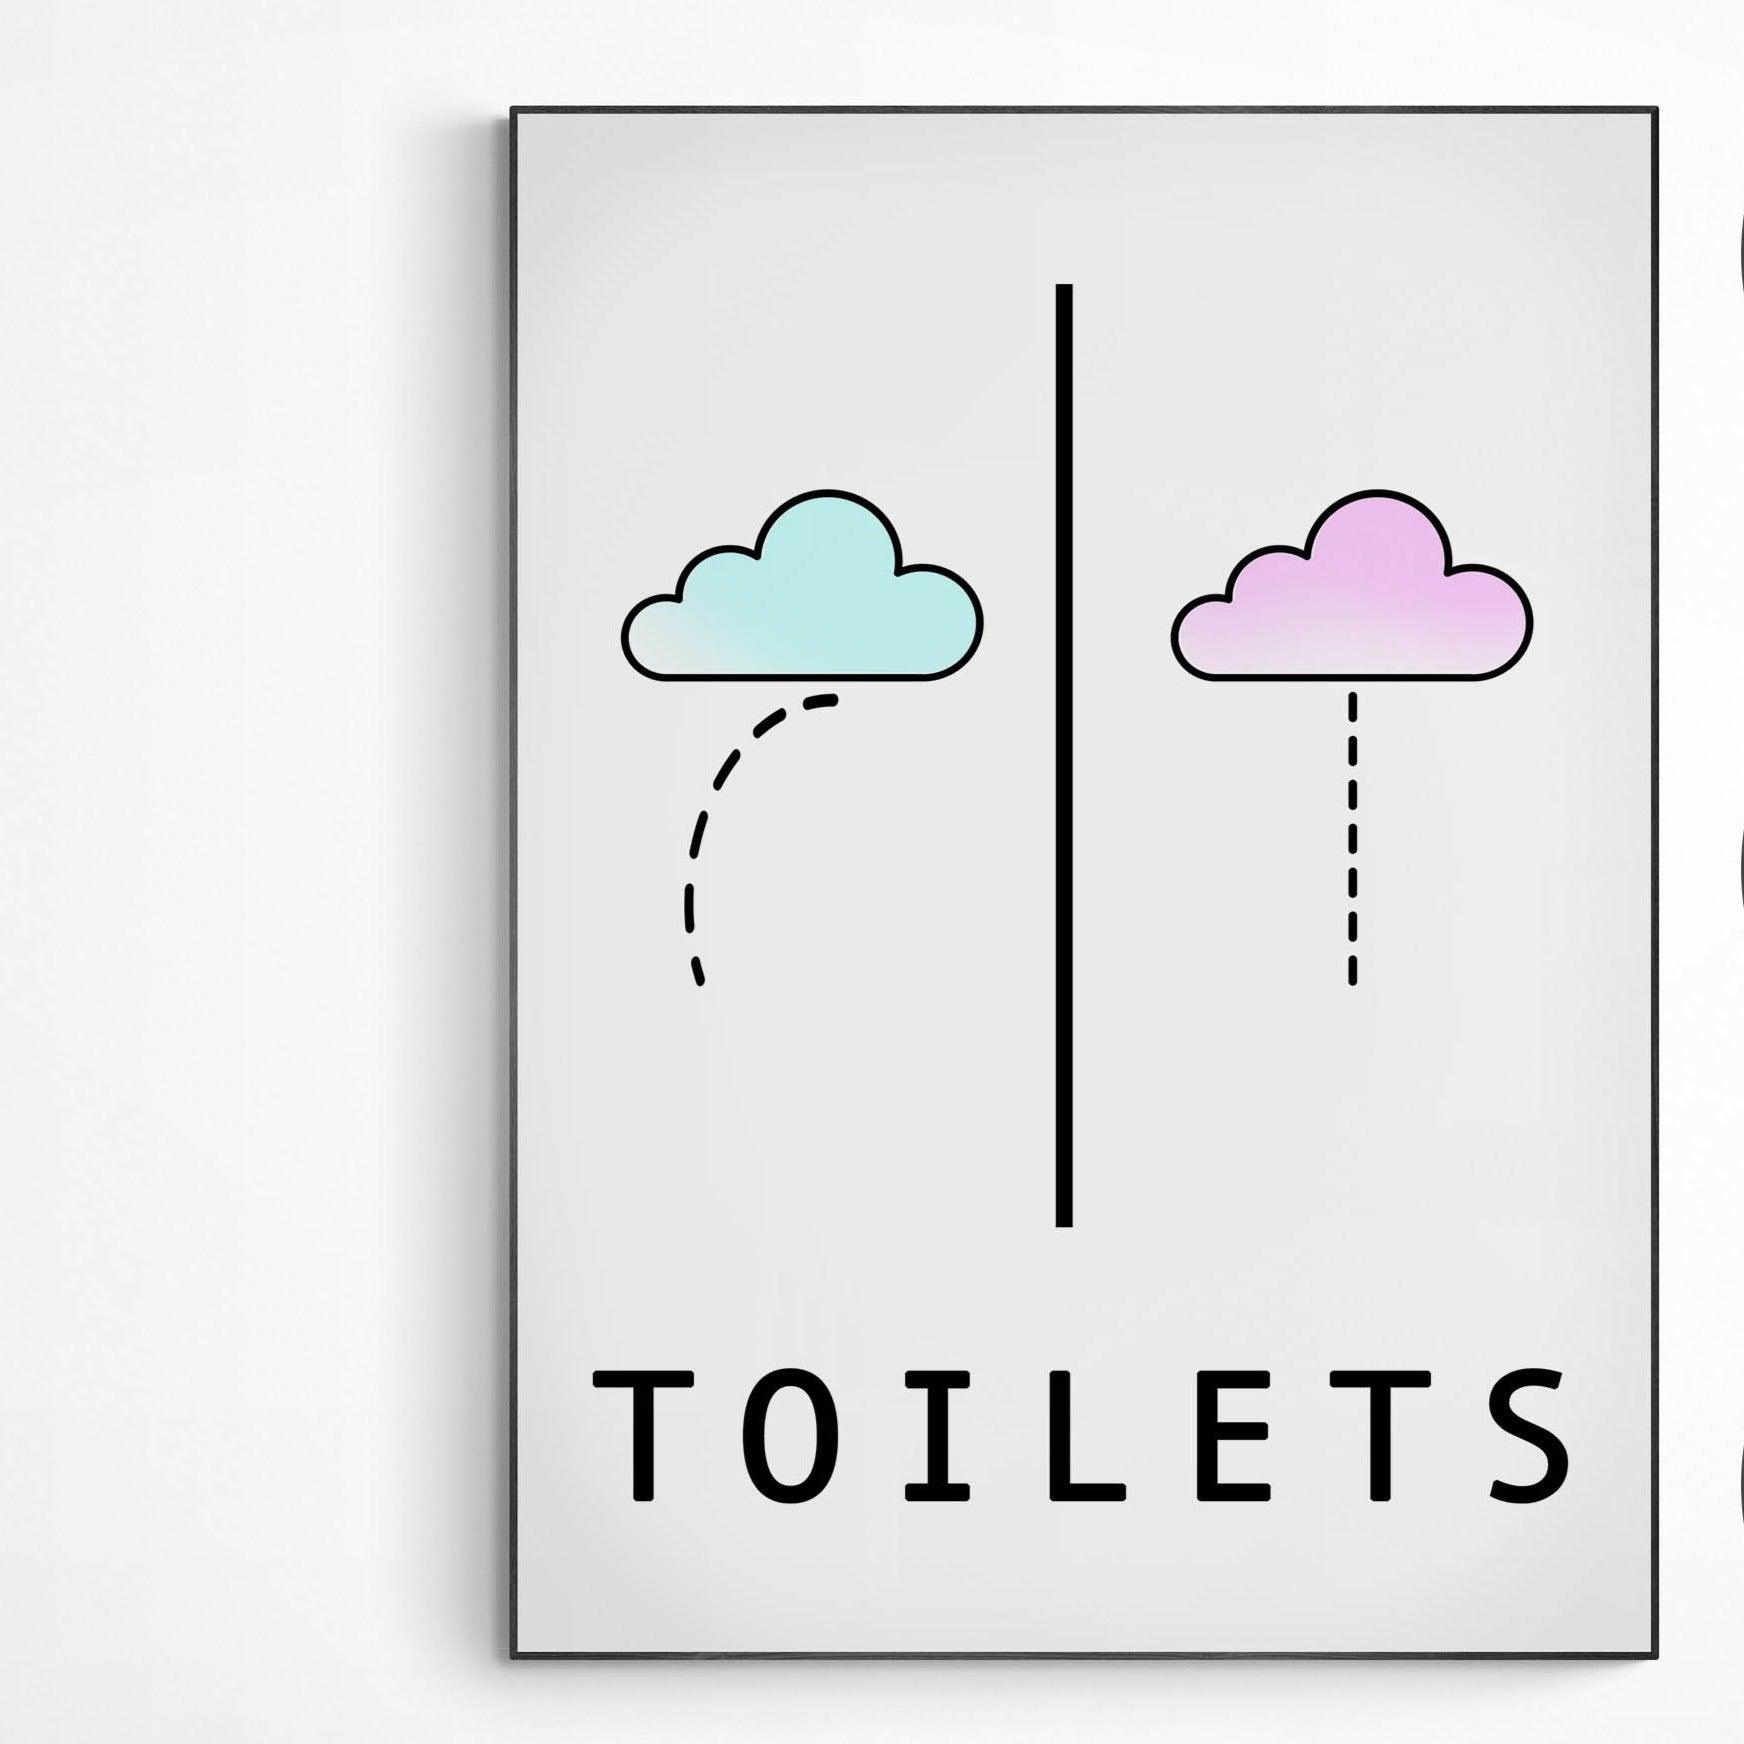 Dress up your downstairs loo in style with these cheeky, humorous prints! Our range of classy, colourful bathroom wall art will make you smile and reflect your personality, without breaking the bank. Spruce up your bathroom walls today! 98types